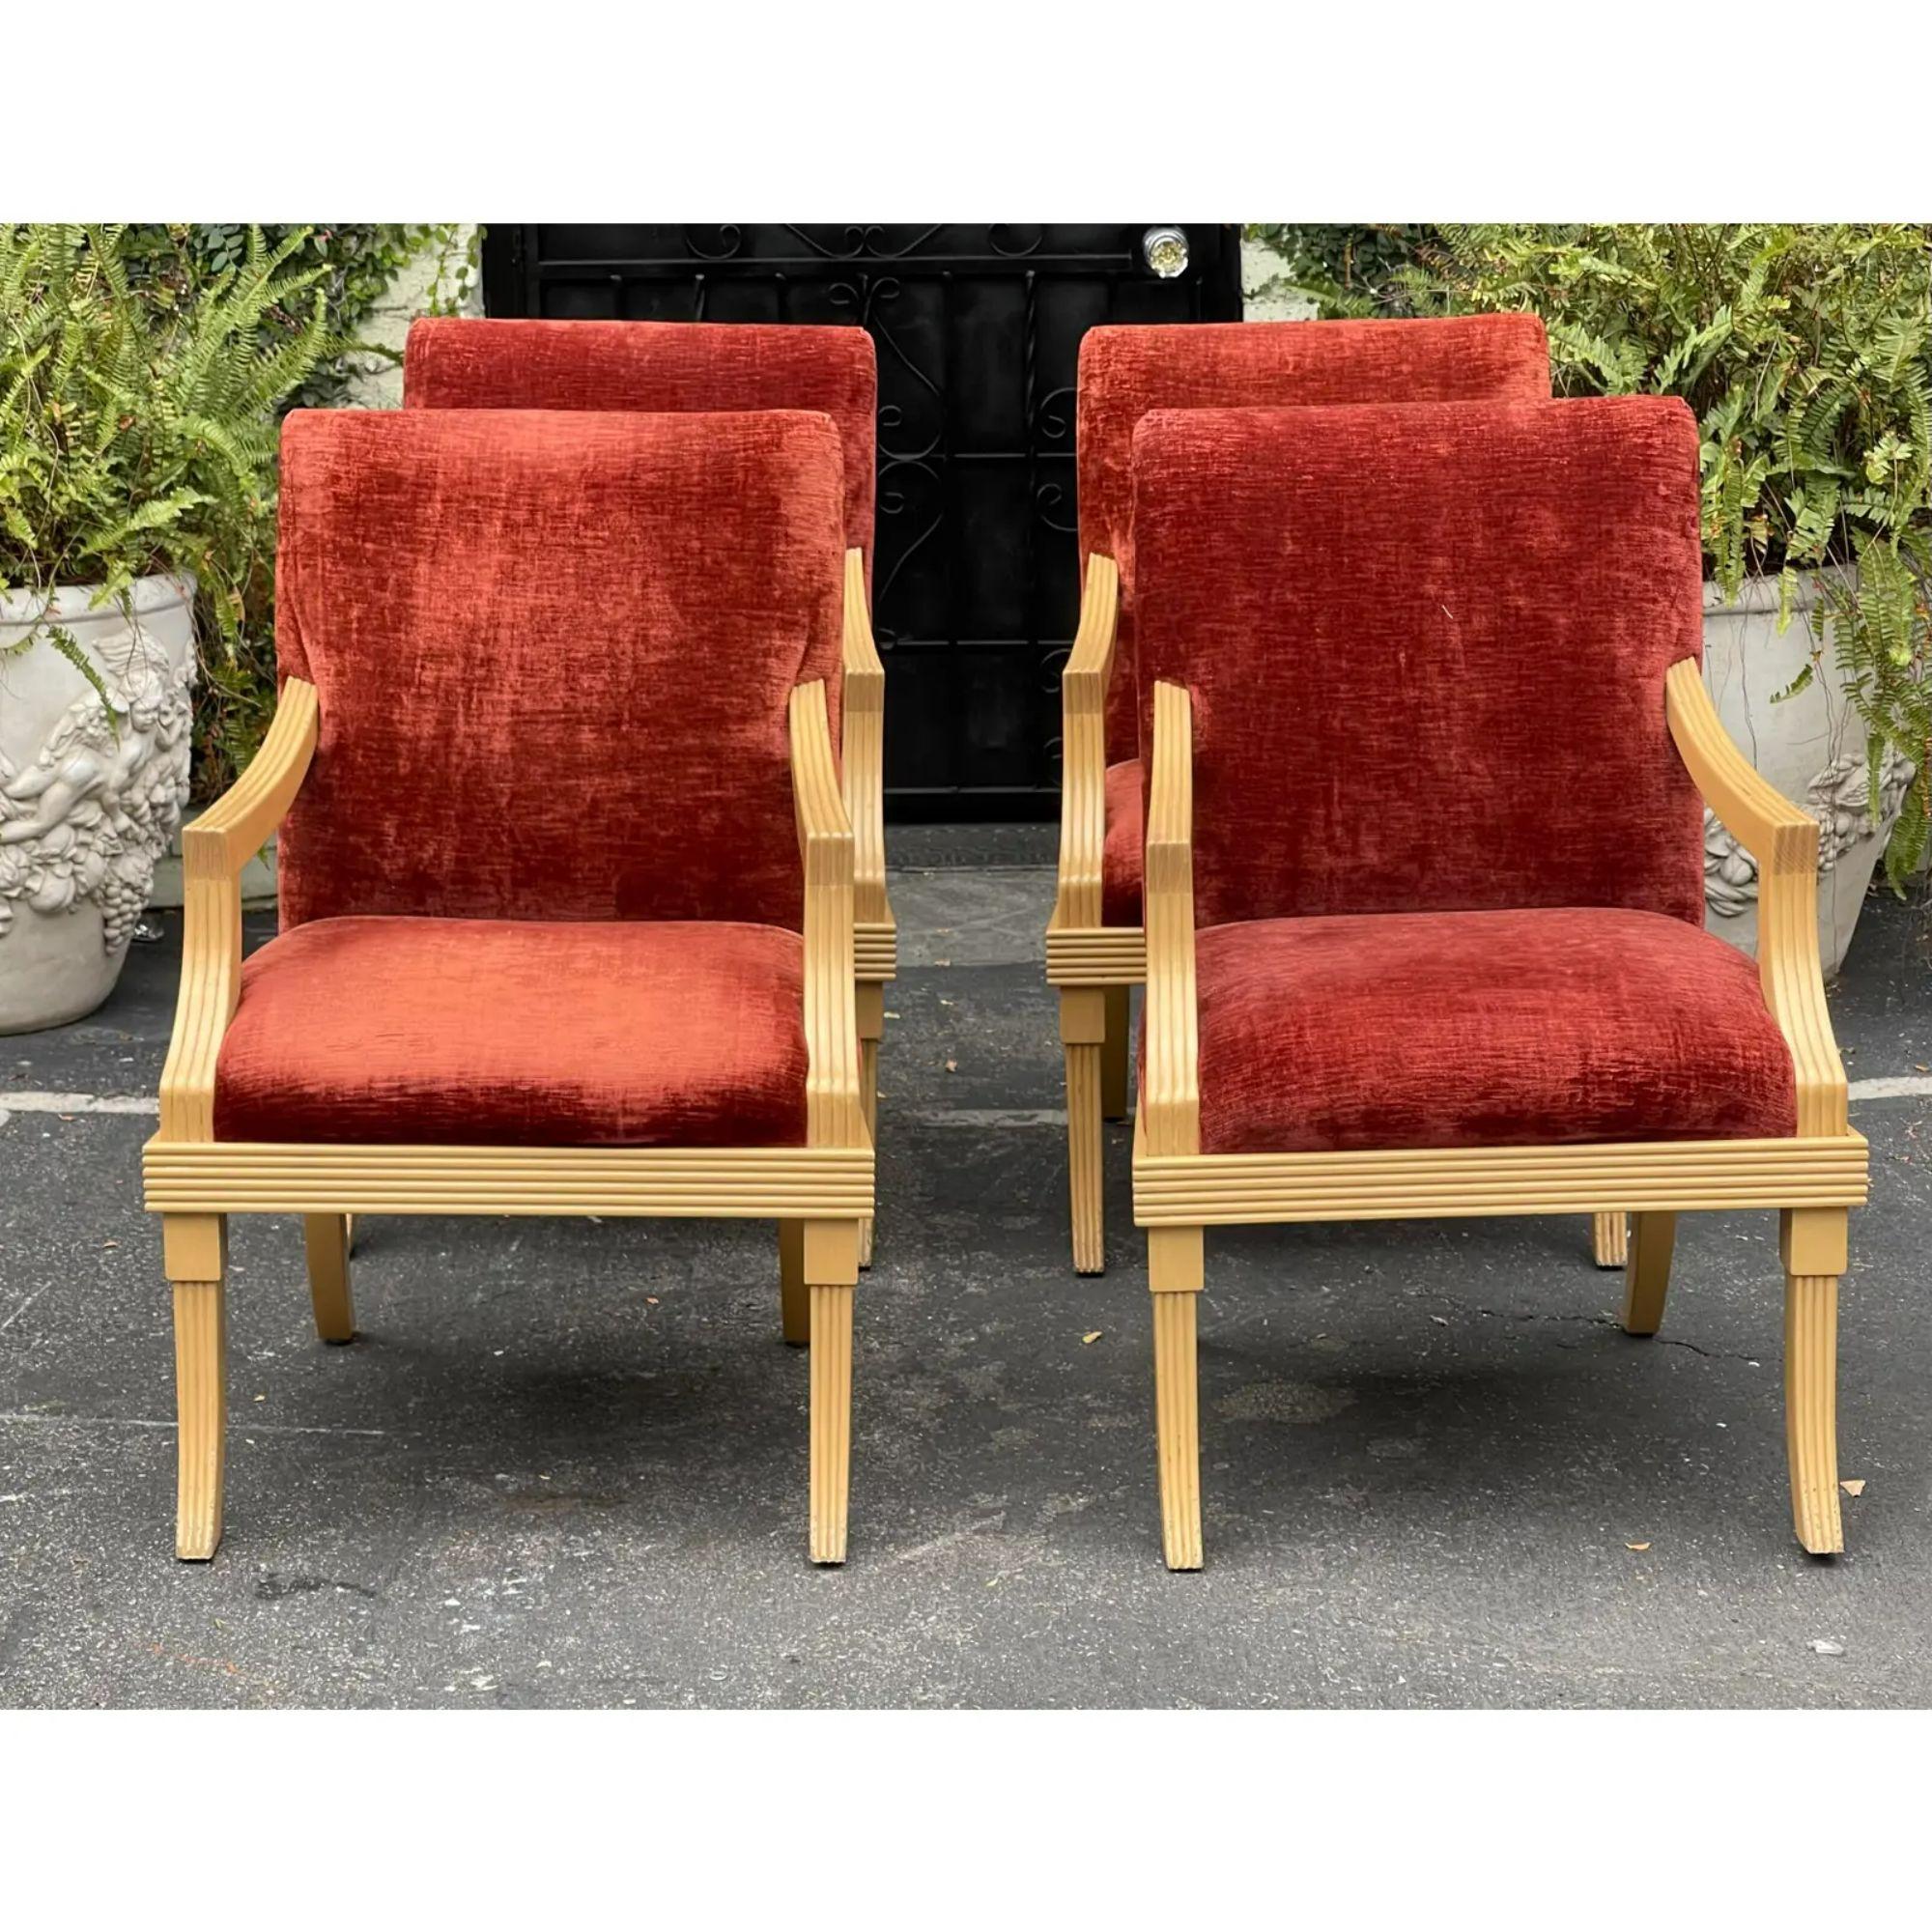 J. Robert Scott Art Deco red distressed velvet dining chairs - set of 4.

Additional information:
Materials: velvet, wood
Color: Red
Brand: J. Robert Scott
Designer: Sally Sirkin Lewis
Period: 1980s
Styles: Art Deco
Number of Seats: 4
Item